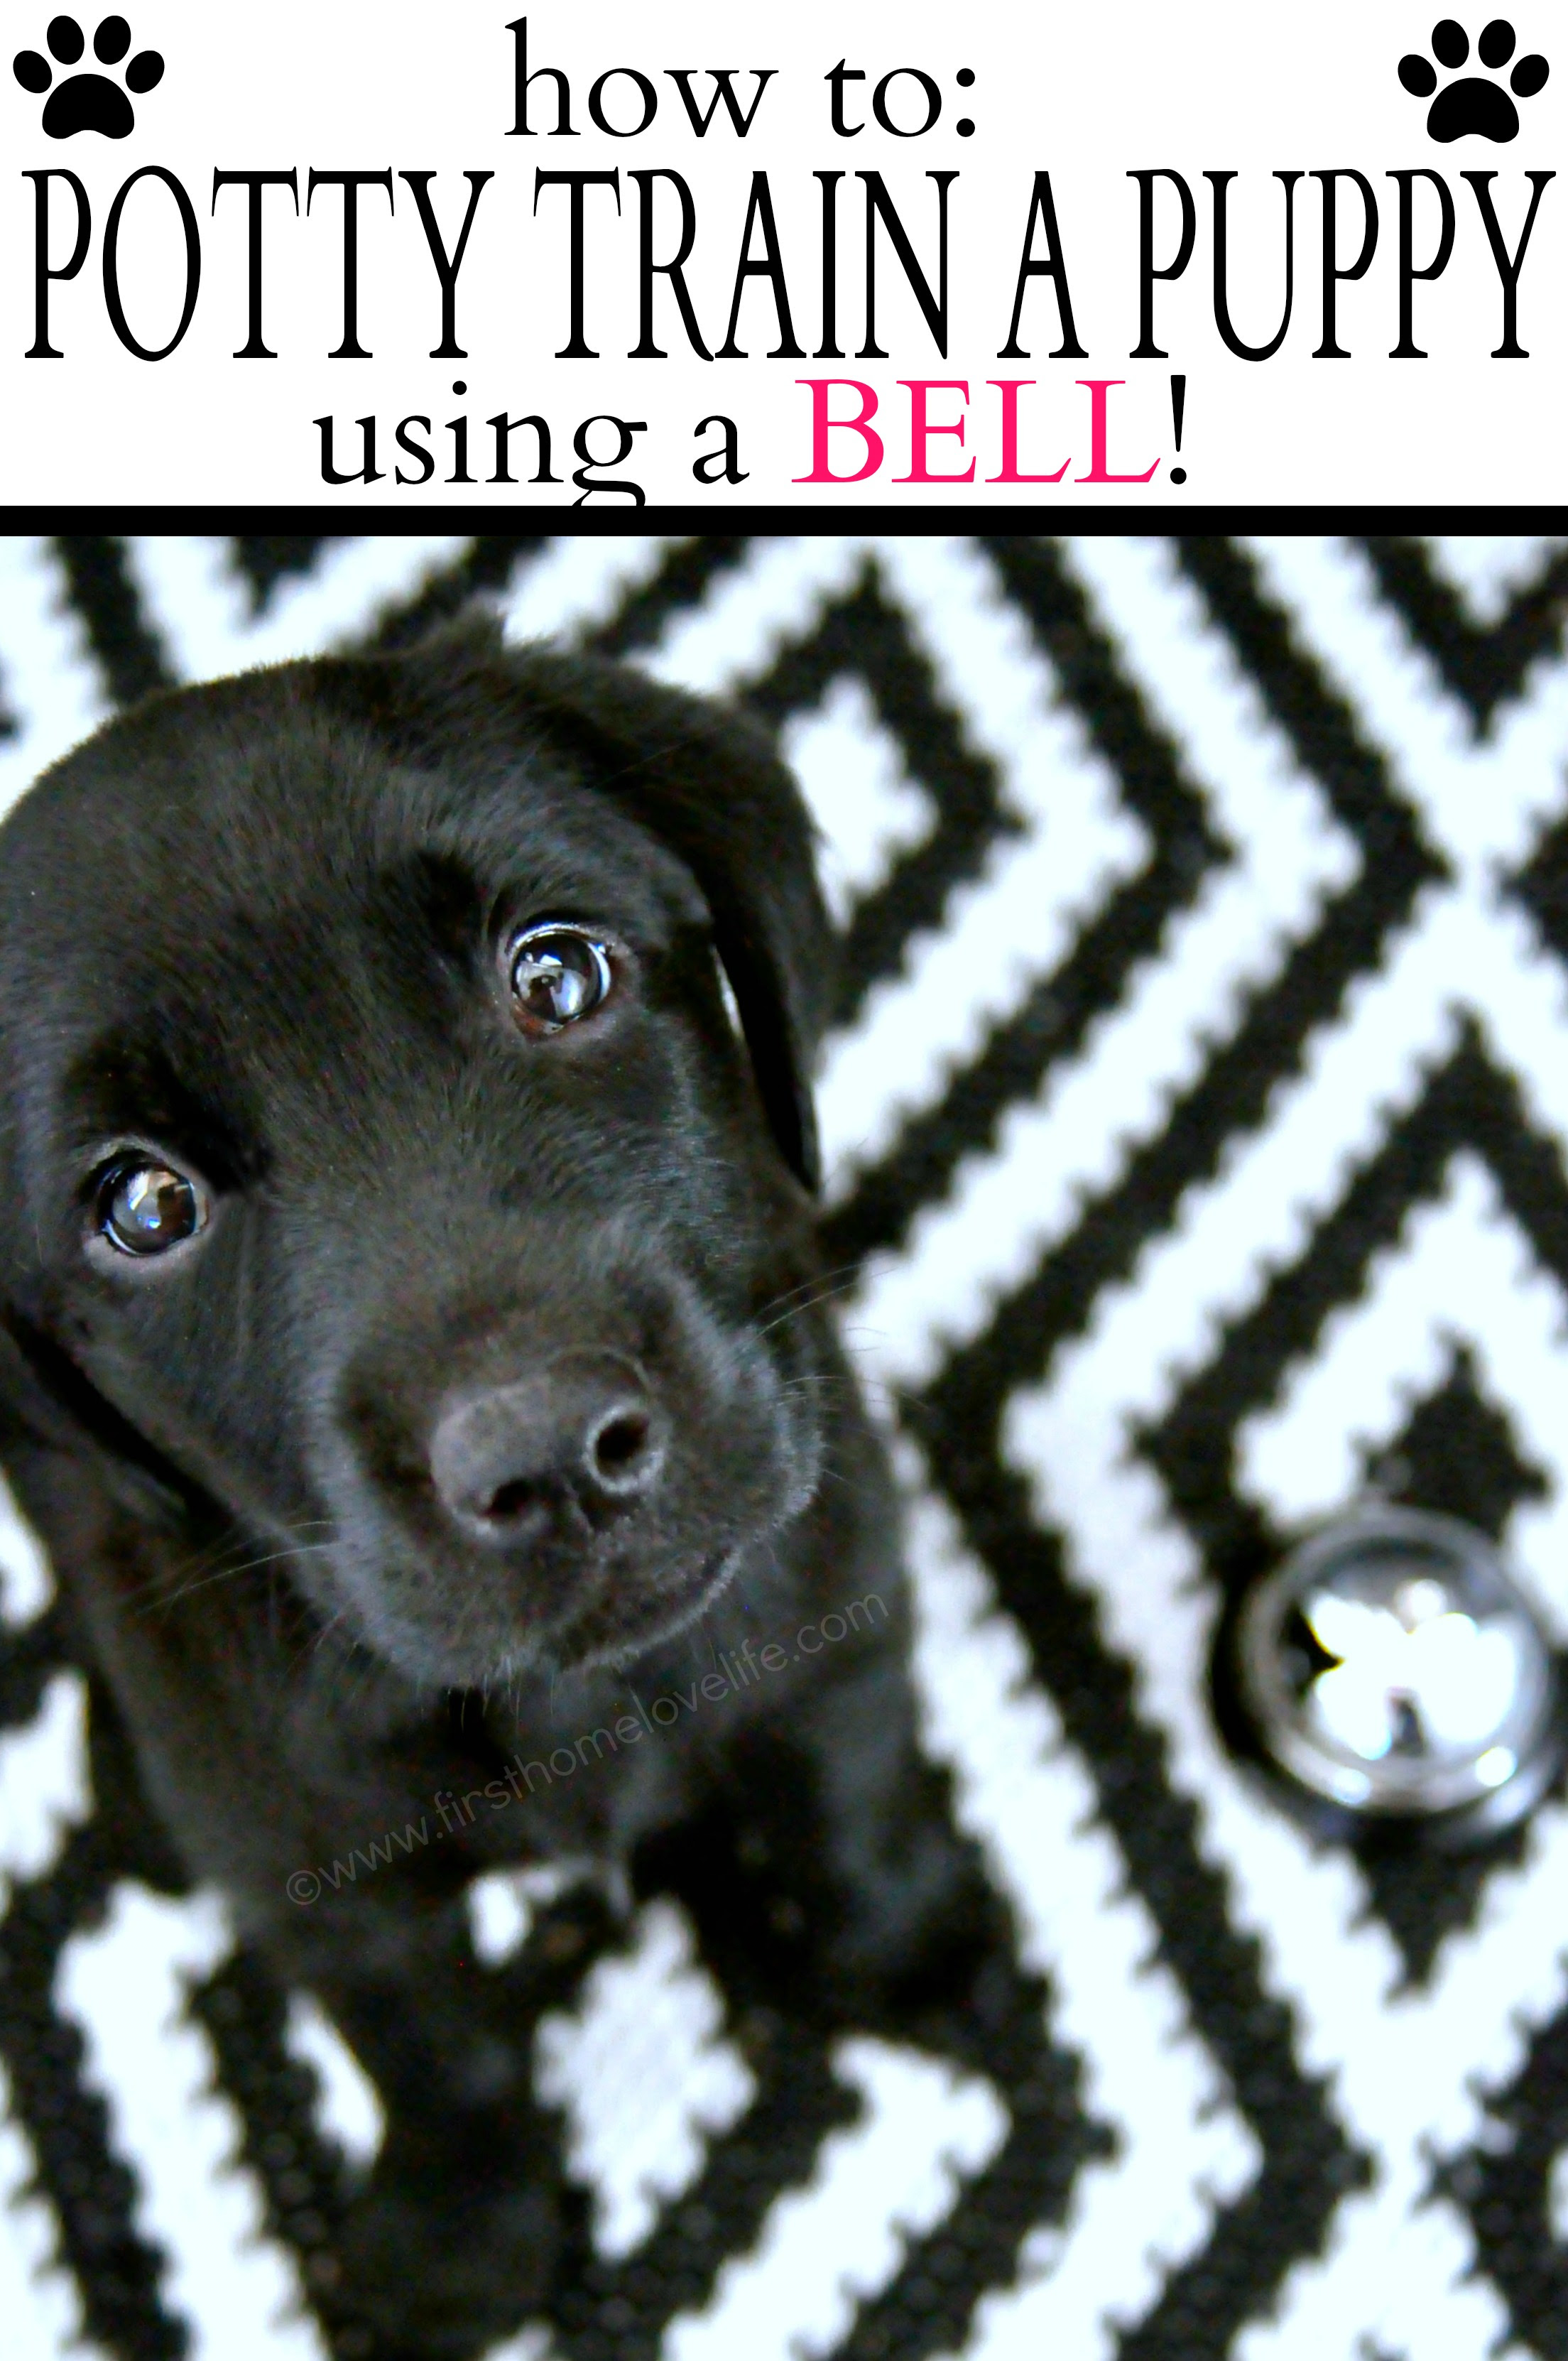 Potty Training Puppy Using a Bell - First Home Love Life